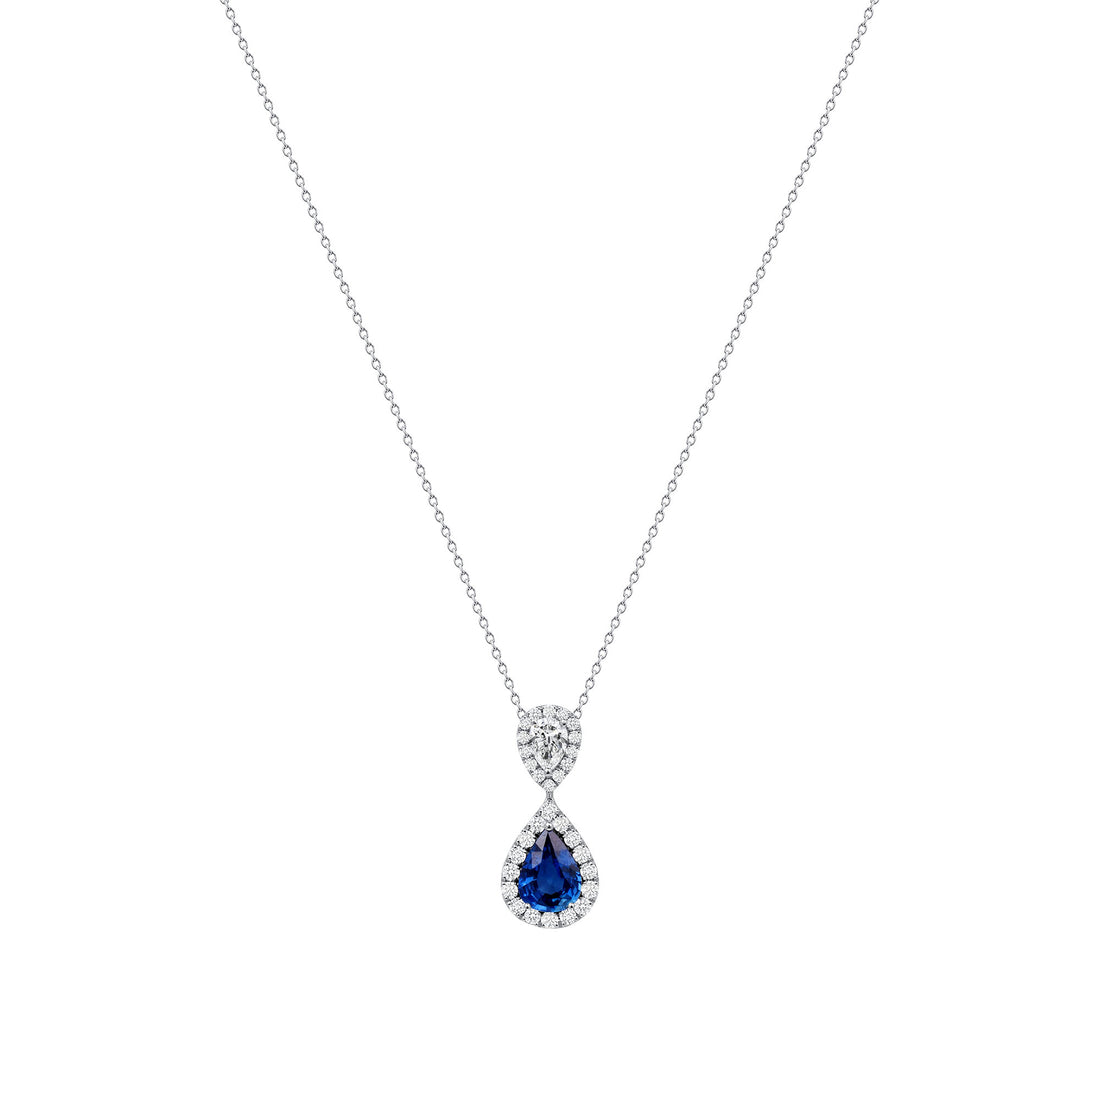 2.94 CT. Pear Cut Blue Sapphire and Diamond Pendant Necklace in 14K White Gold